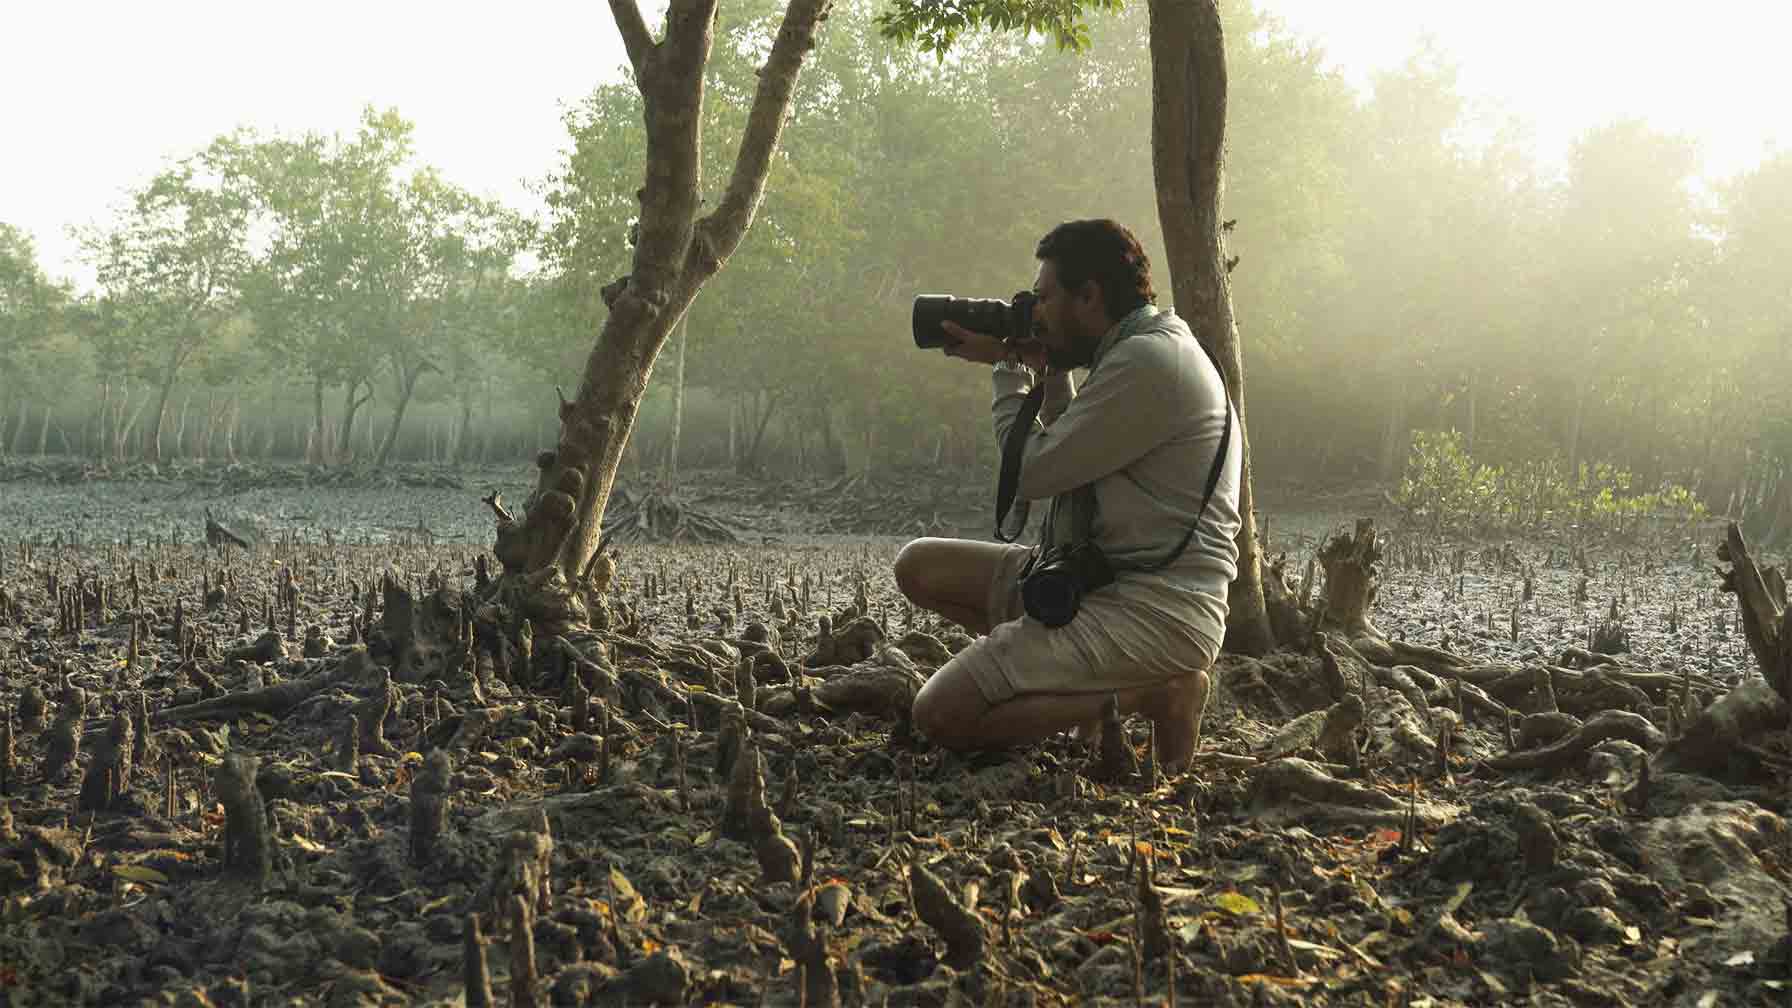 Exploring the Sundarbans with our photographer: the world’s largest mangrove forest is a valuable ecosystem. GIZ, on behalf of the German Government, has been supporting the protection and sustainable use of the Sundarbans since 2015, thus contributing to the achievement of United Nations Sustainable Development Goal 15. © Tapash Paul/GIZ